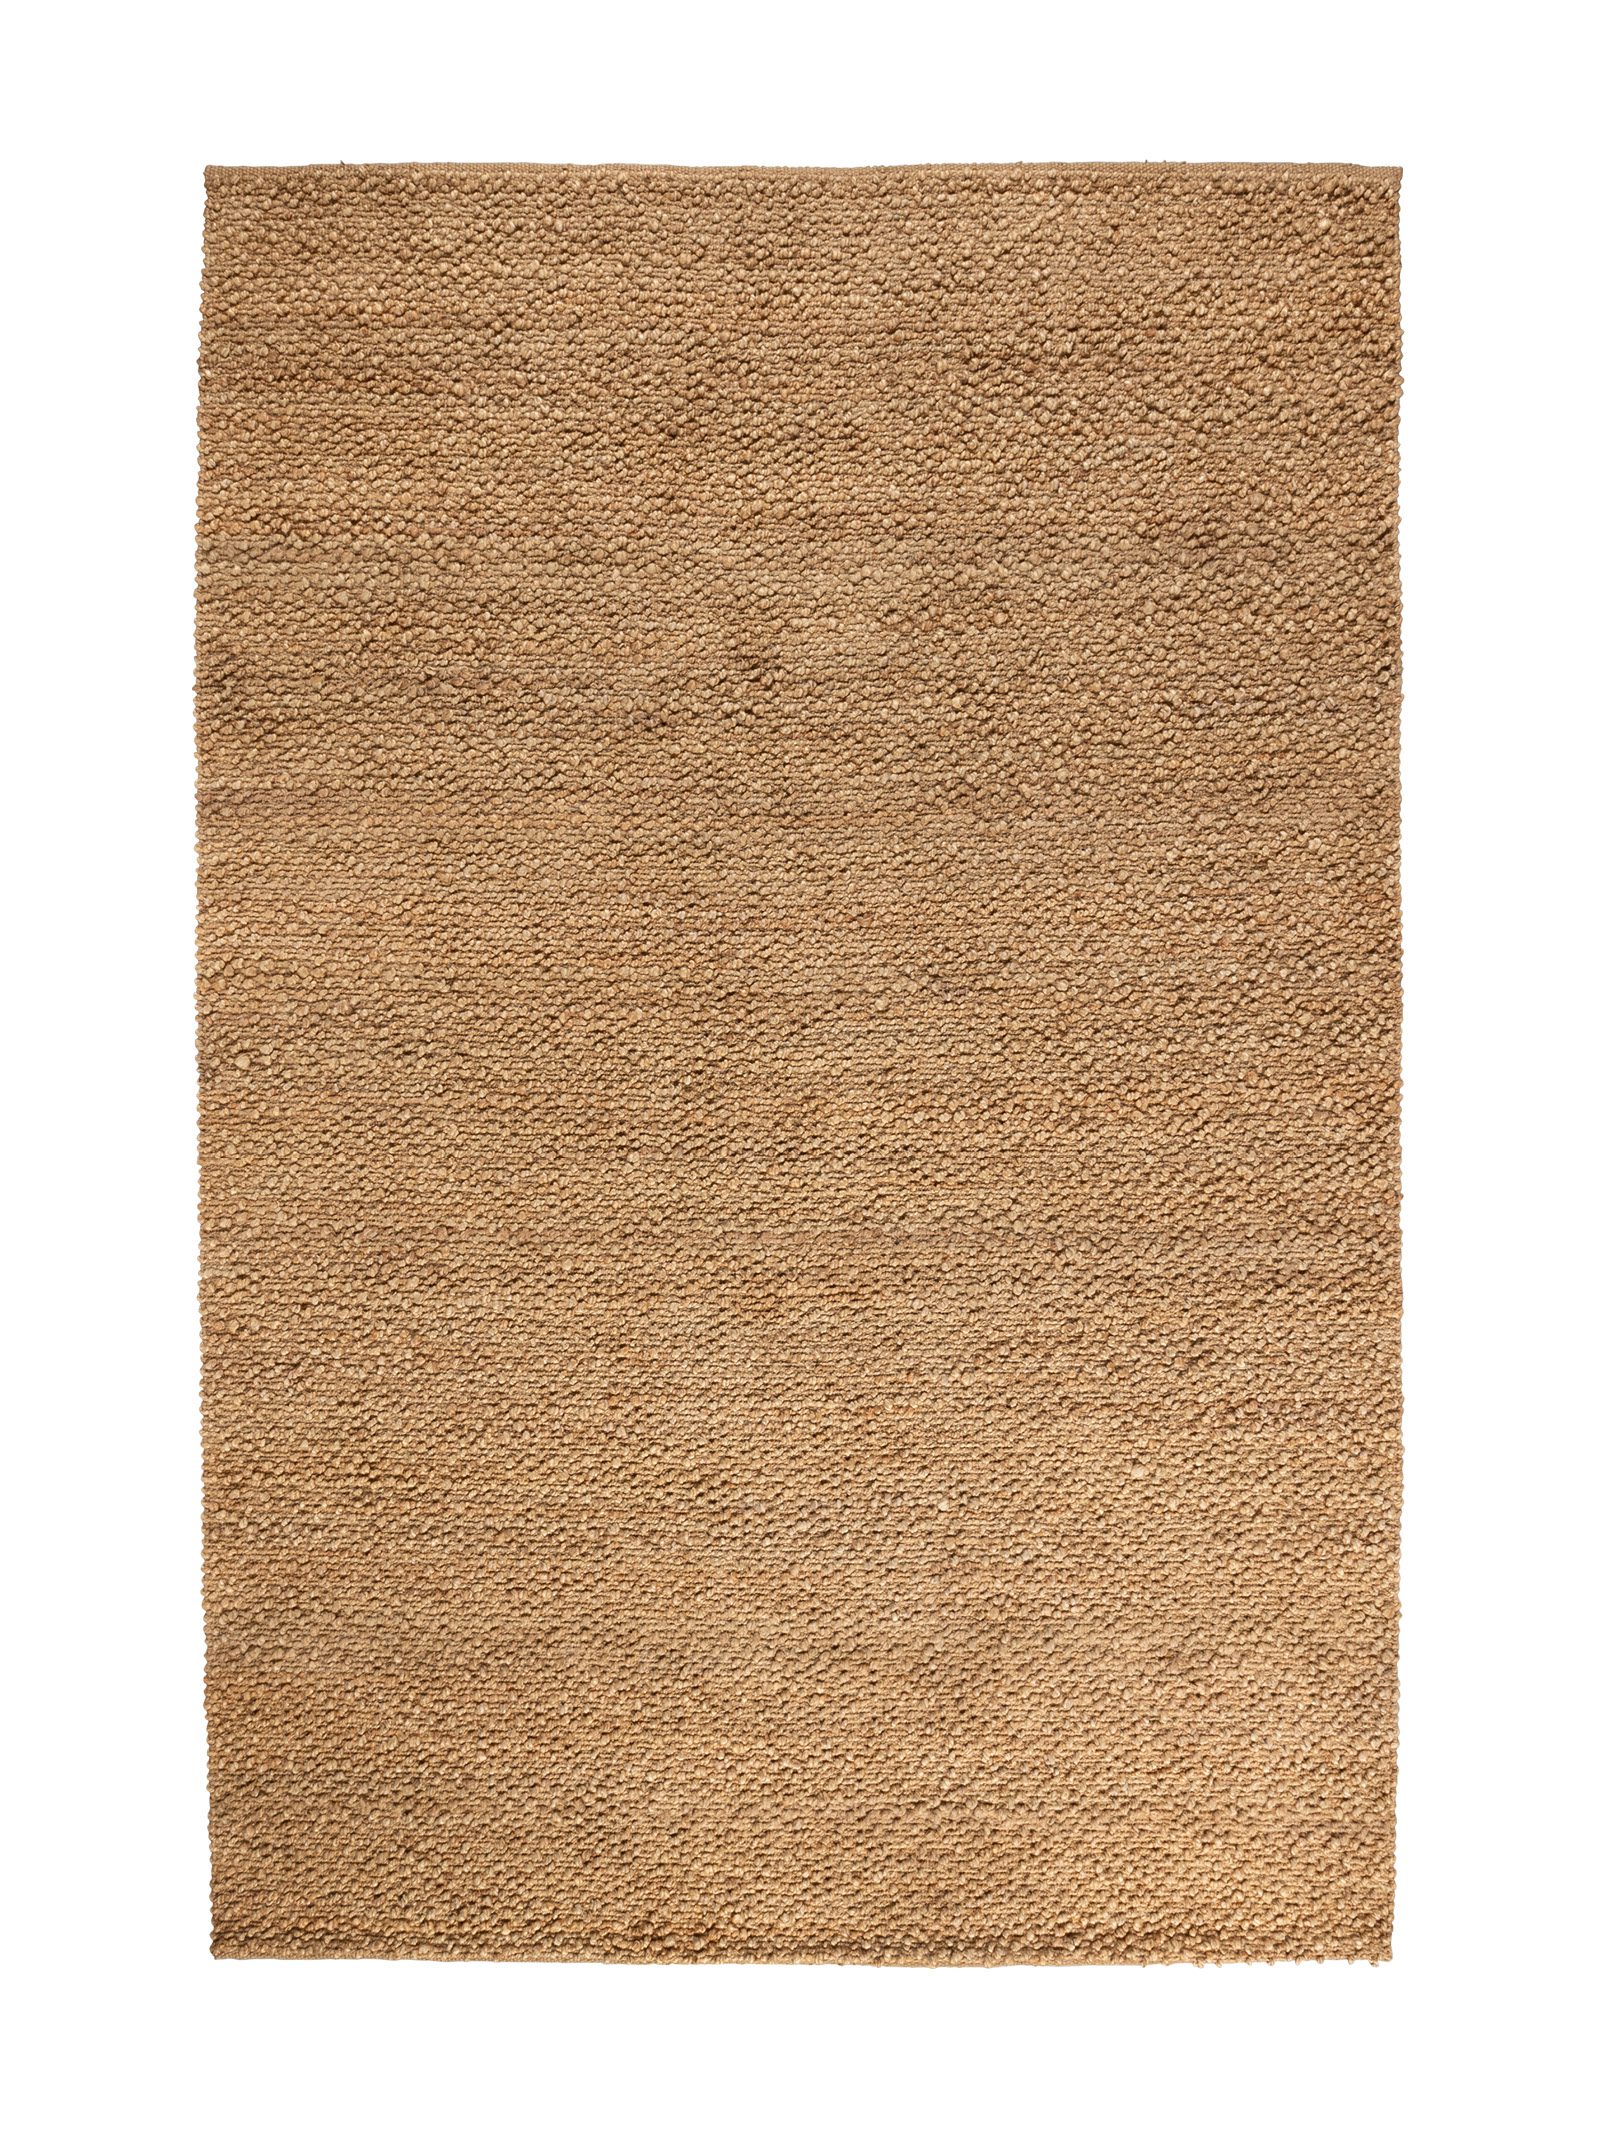 French Boucle Rug in Natural